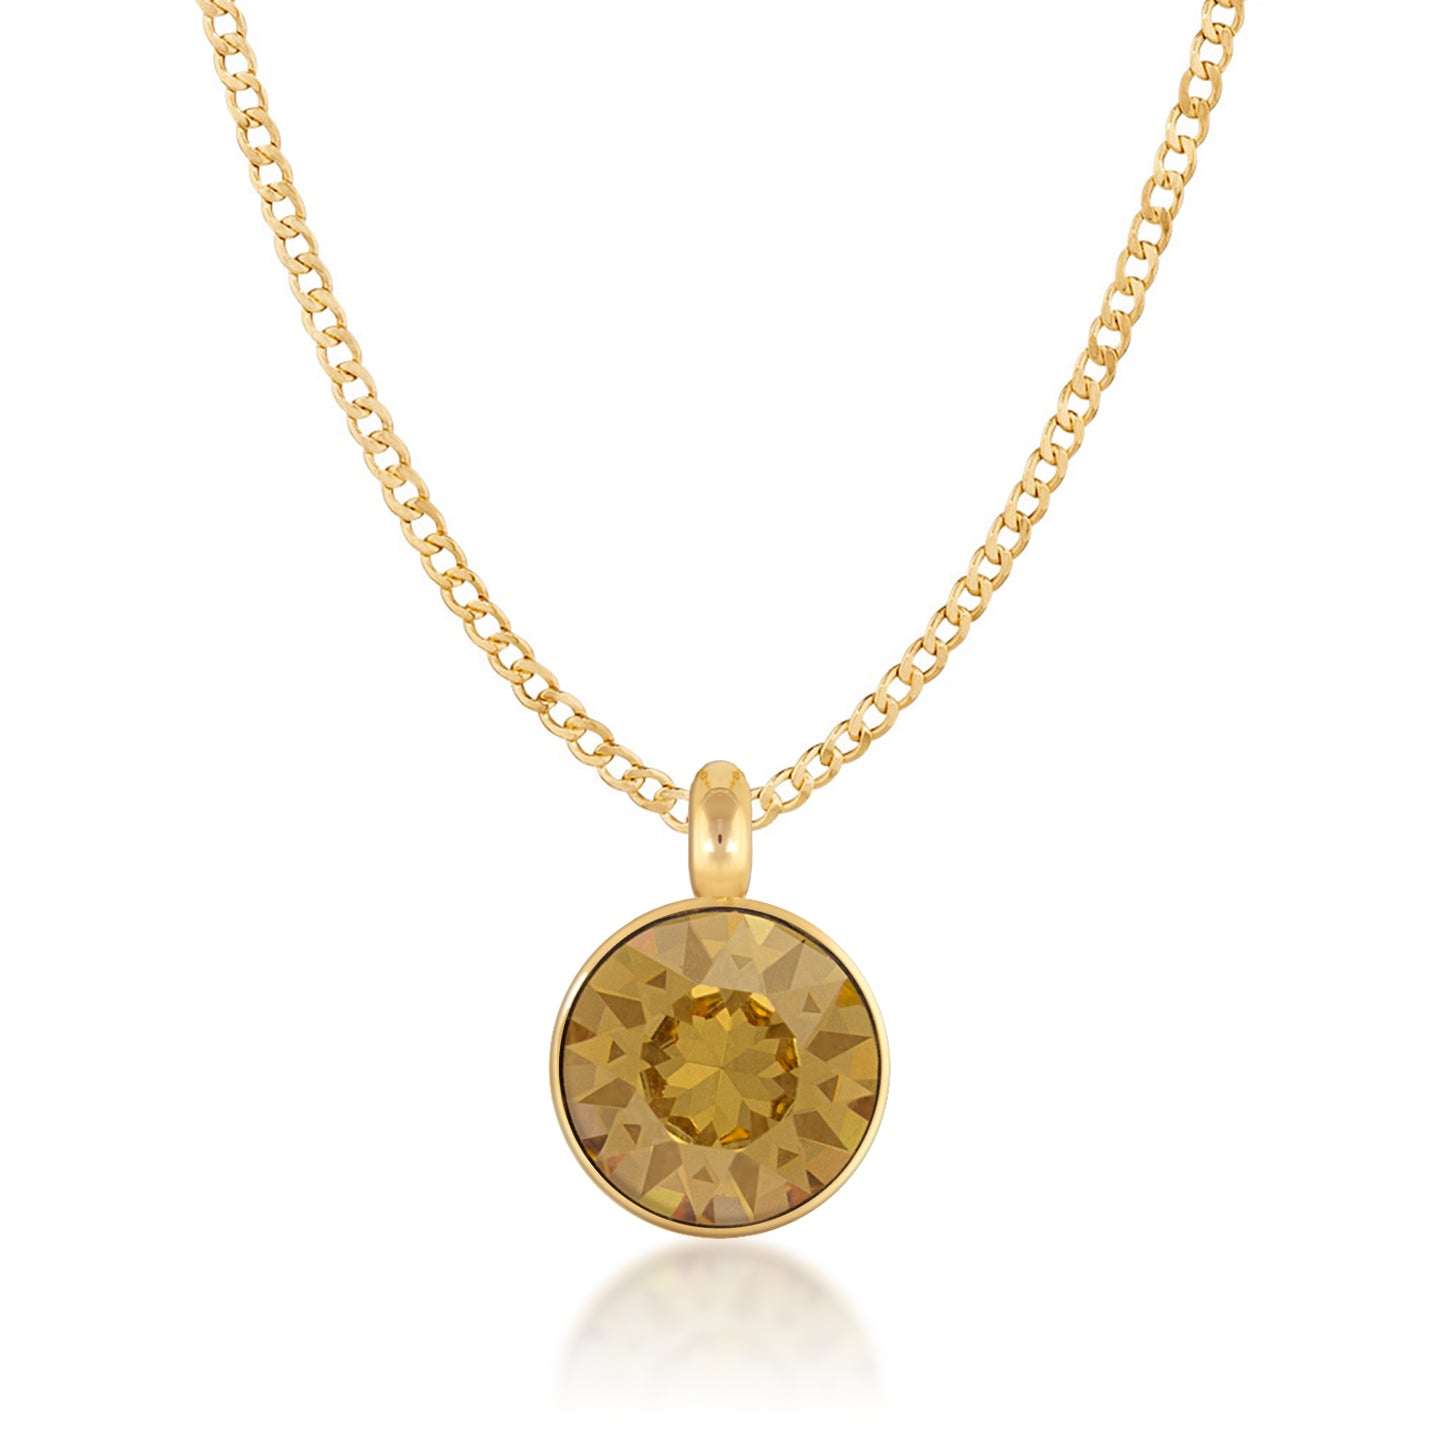 Bella Pendant Necklace with Yellow Brown Light Topaz Round Crystals from Swarovski Gold Plated - Ed Heart